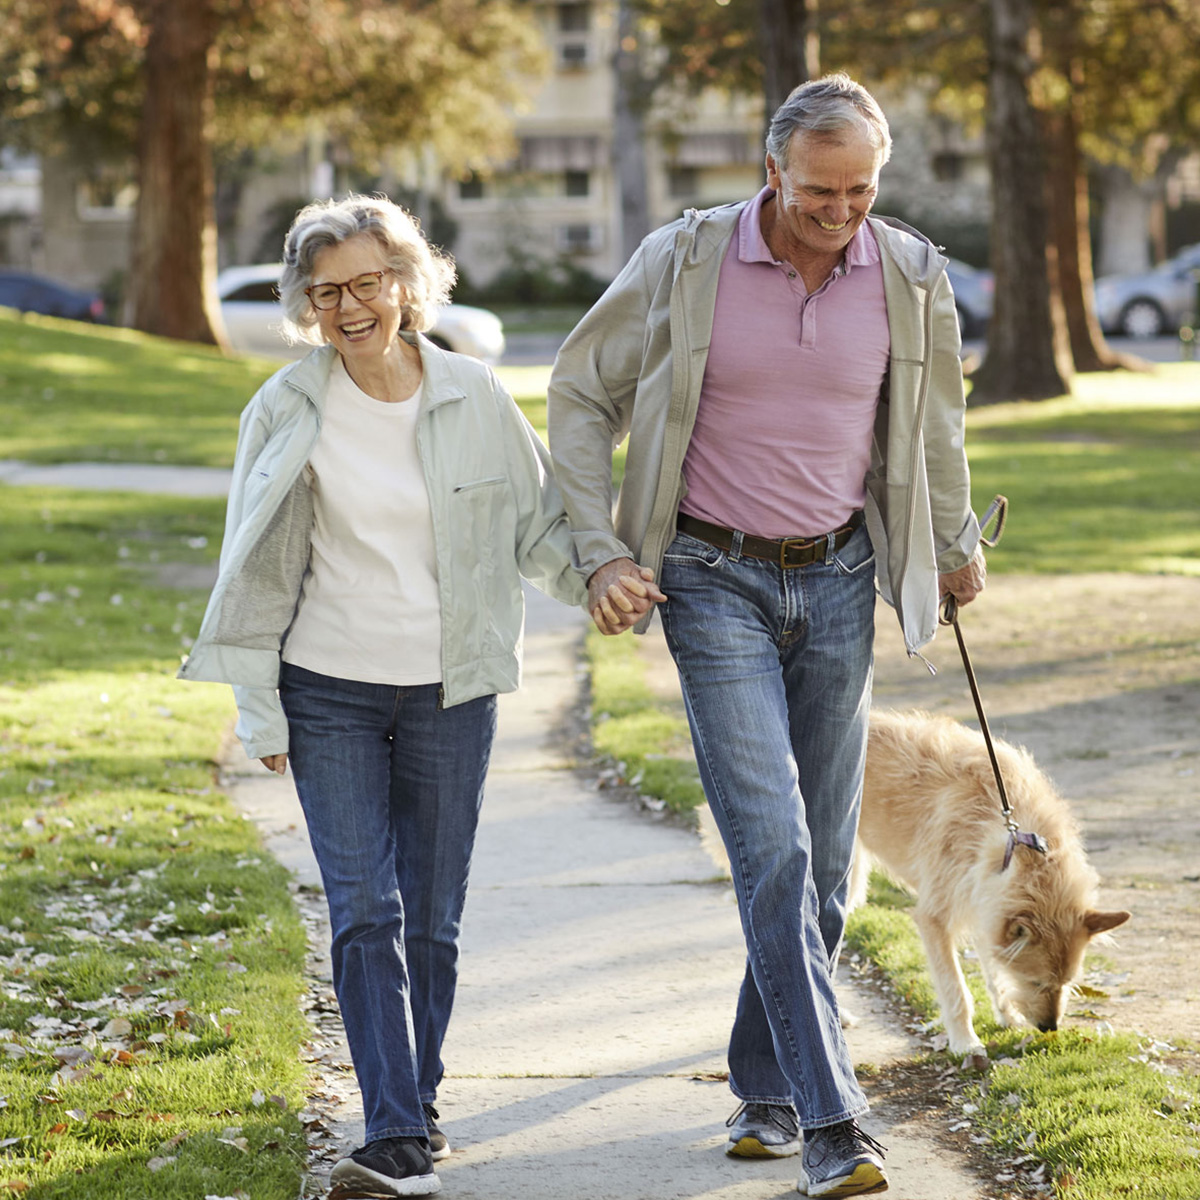 Smiling couple holding hands and walking their dog on a sunny day.